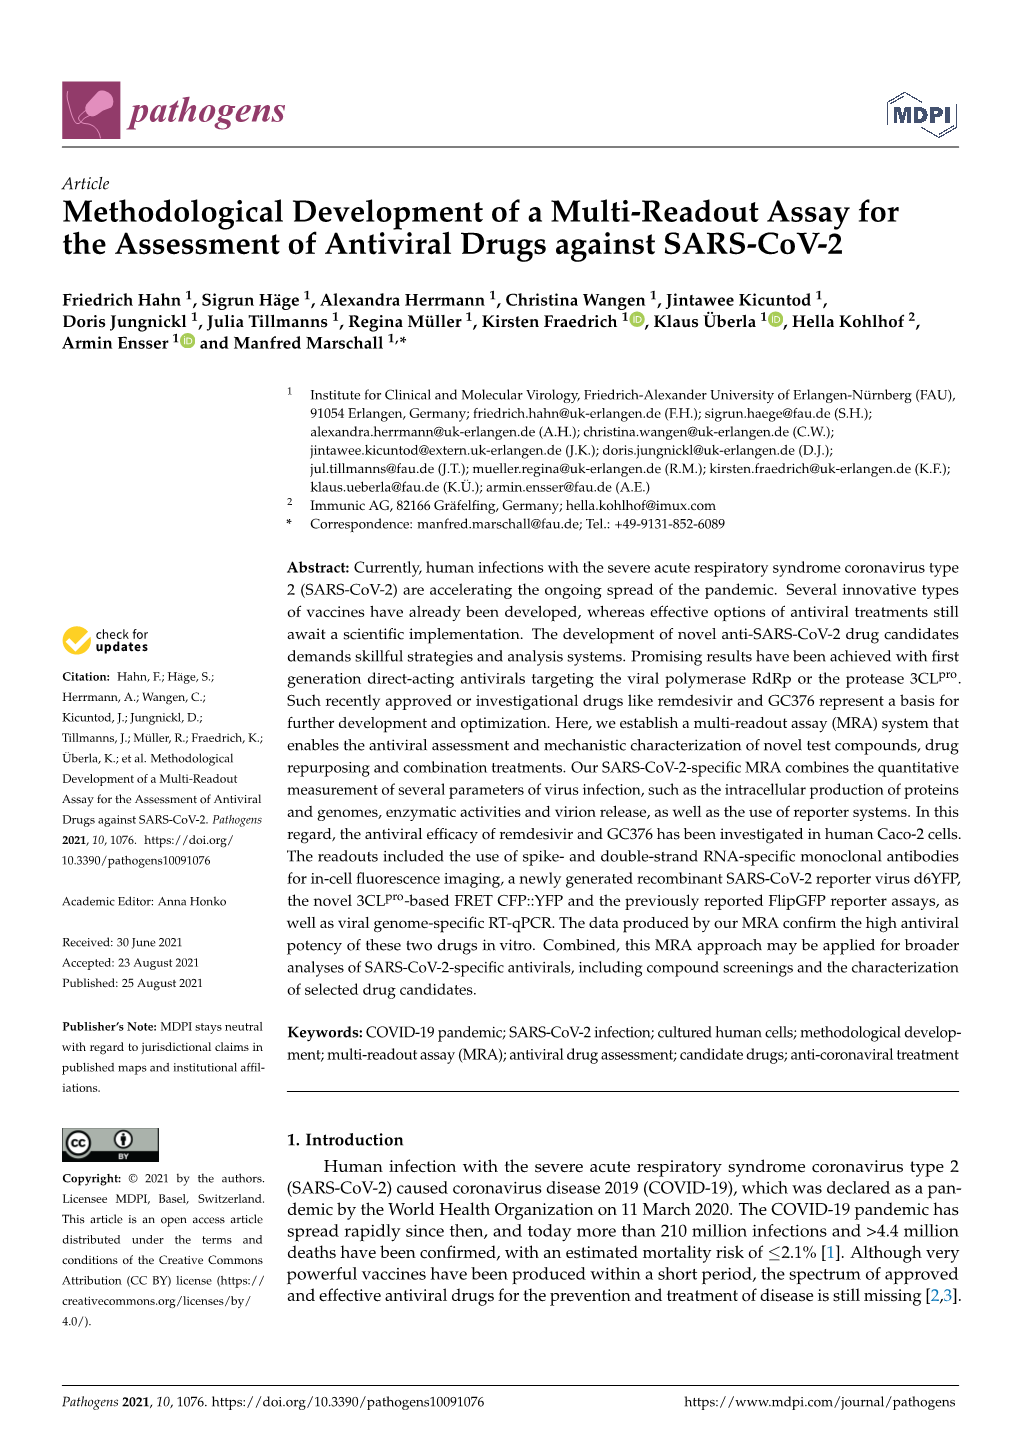 Methodological Development of a Multi-Readout Assay for the Assessment of Antiviral Drugs Against SARS-Cov-2